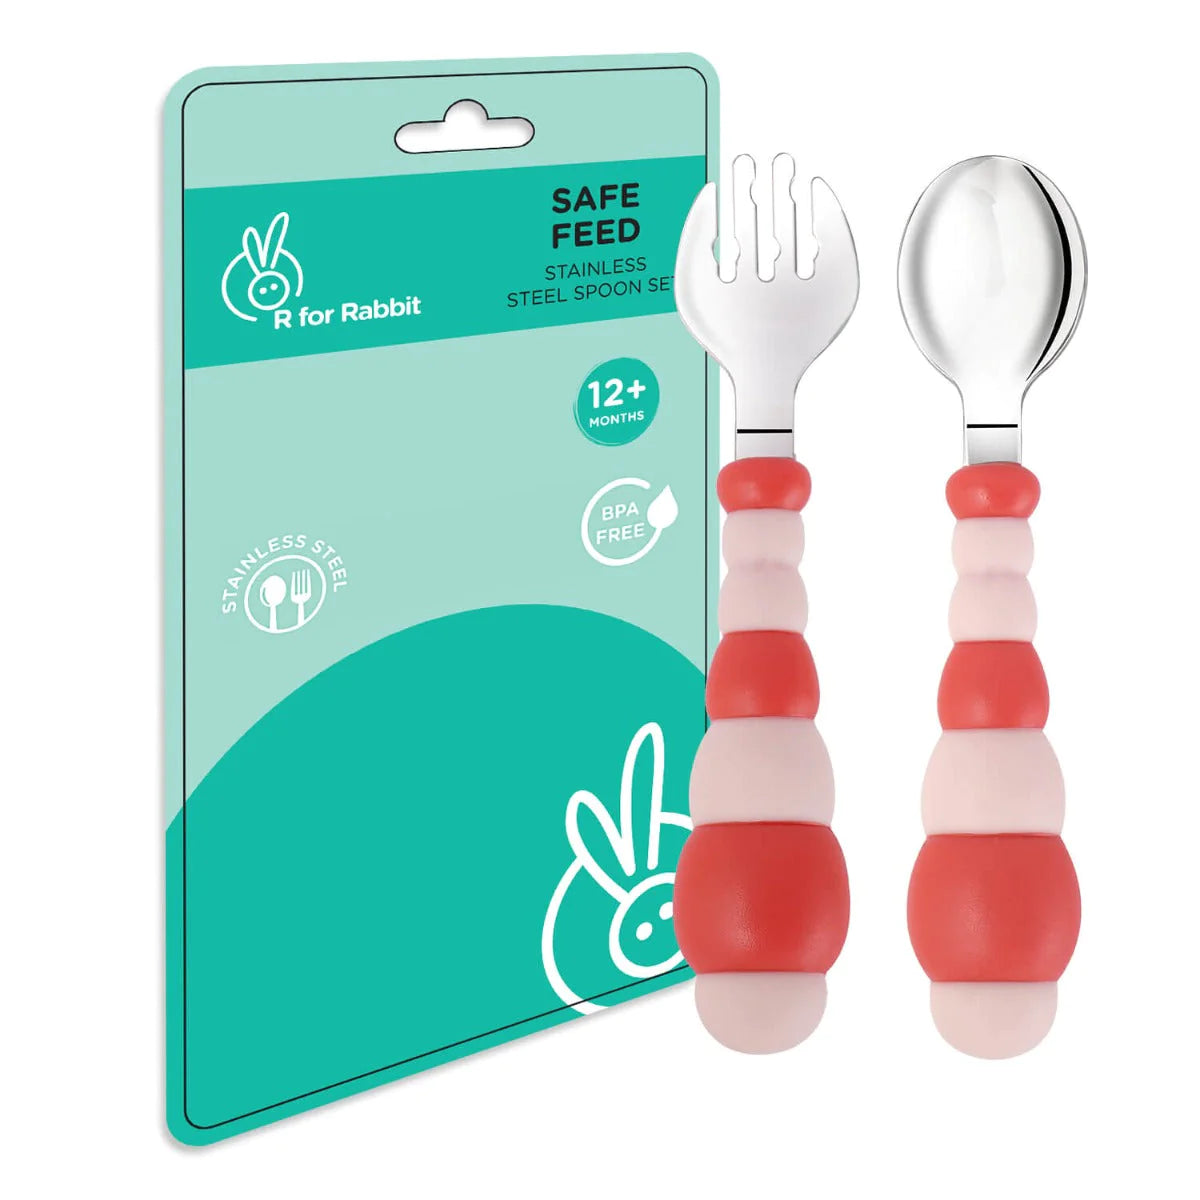 Safe Feed Stainless Steel Spoon Set